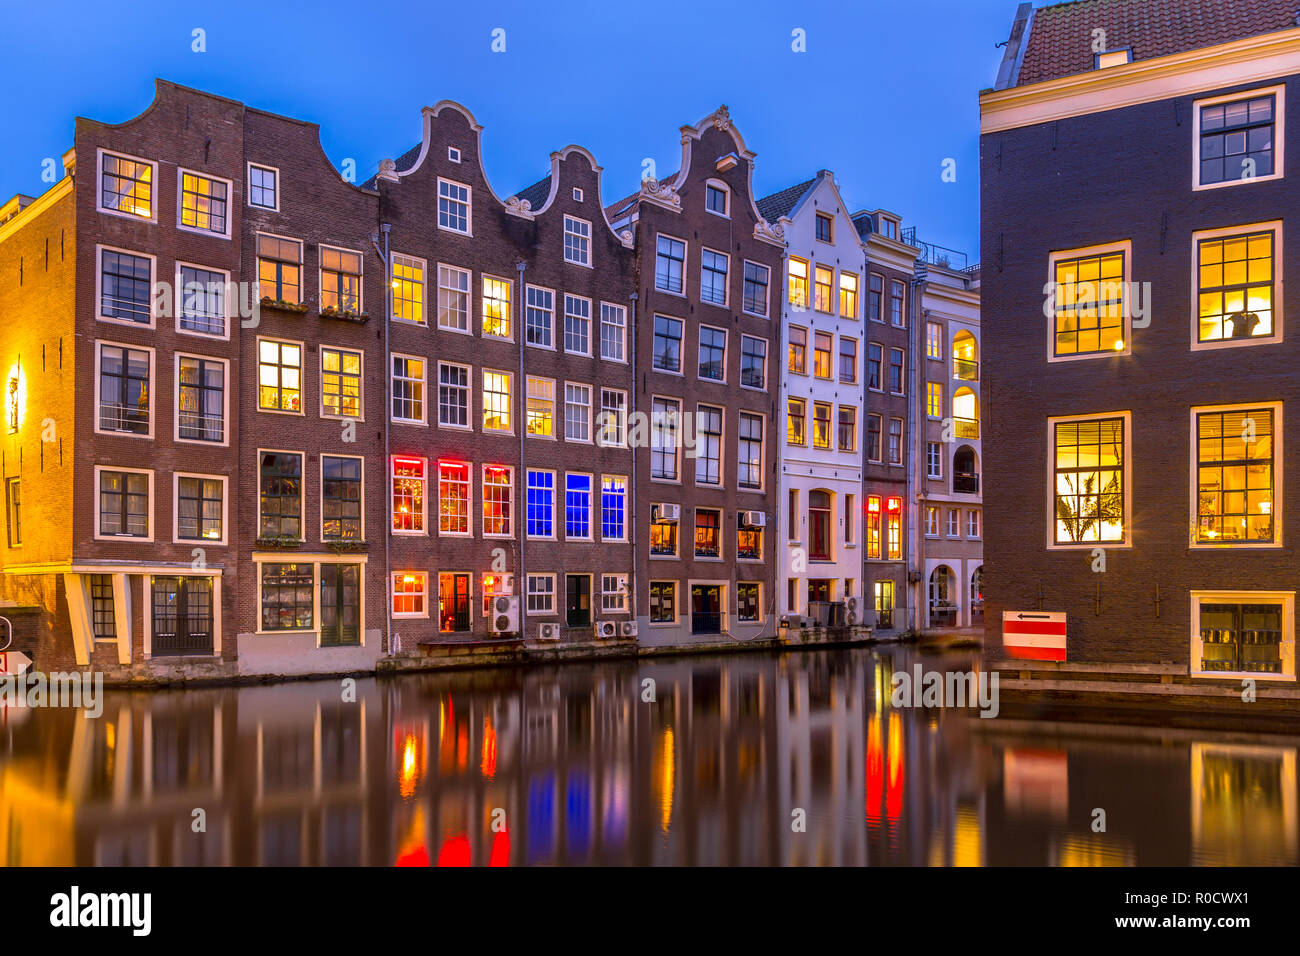 Nightscape of colorful traditional canal houses at night seen from the armbrug on the oudezijds voorburgwal in the UNESCO World Heritage site of Amste Stock Photo